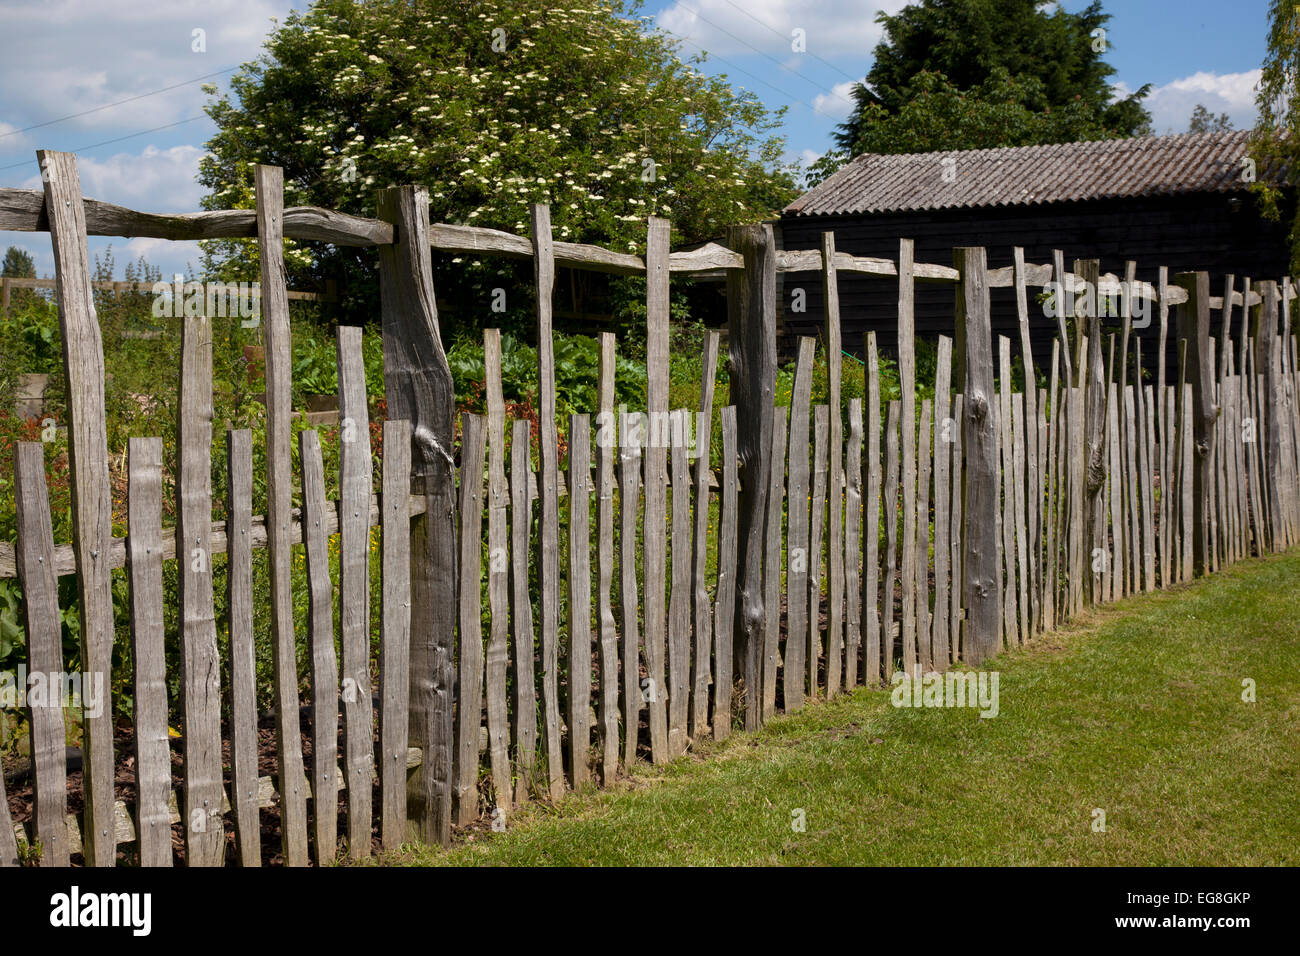 Rustic wooden Cleft fencing in English country garden,Oxfordshire,England Stock Photo